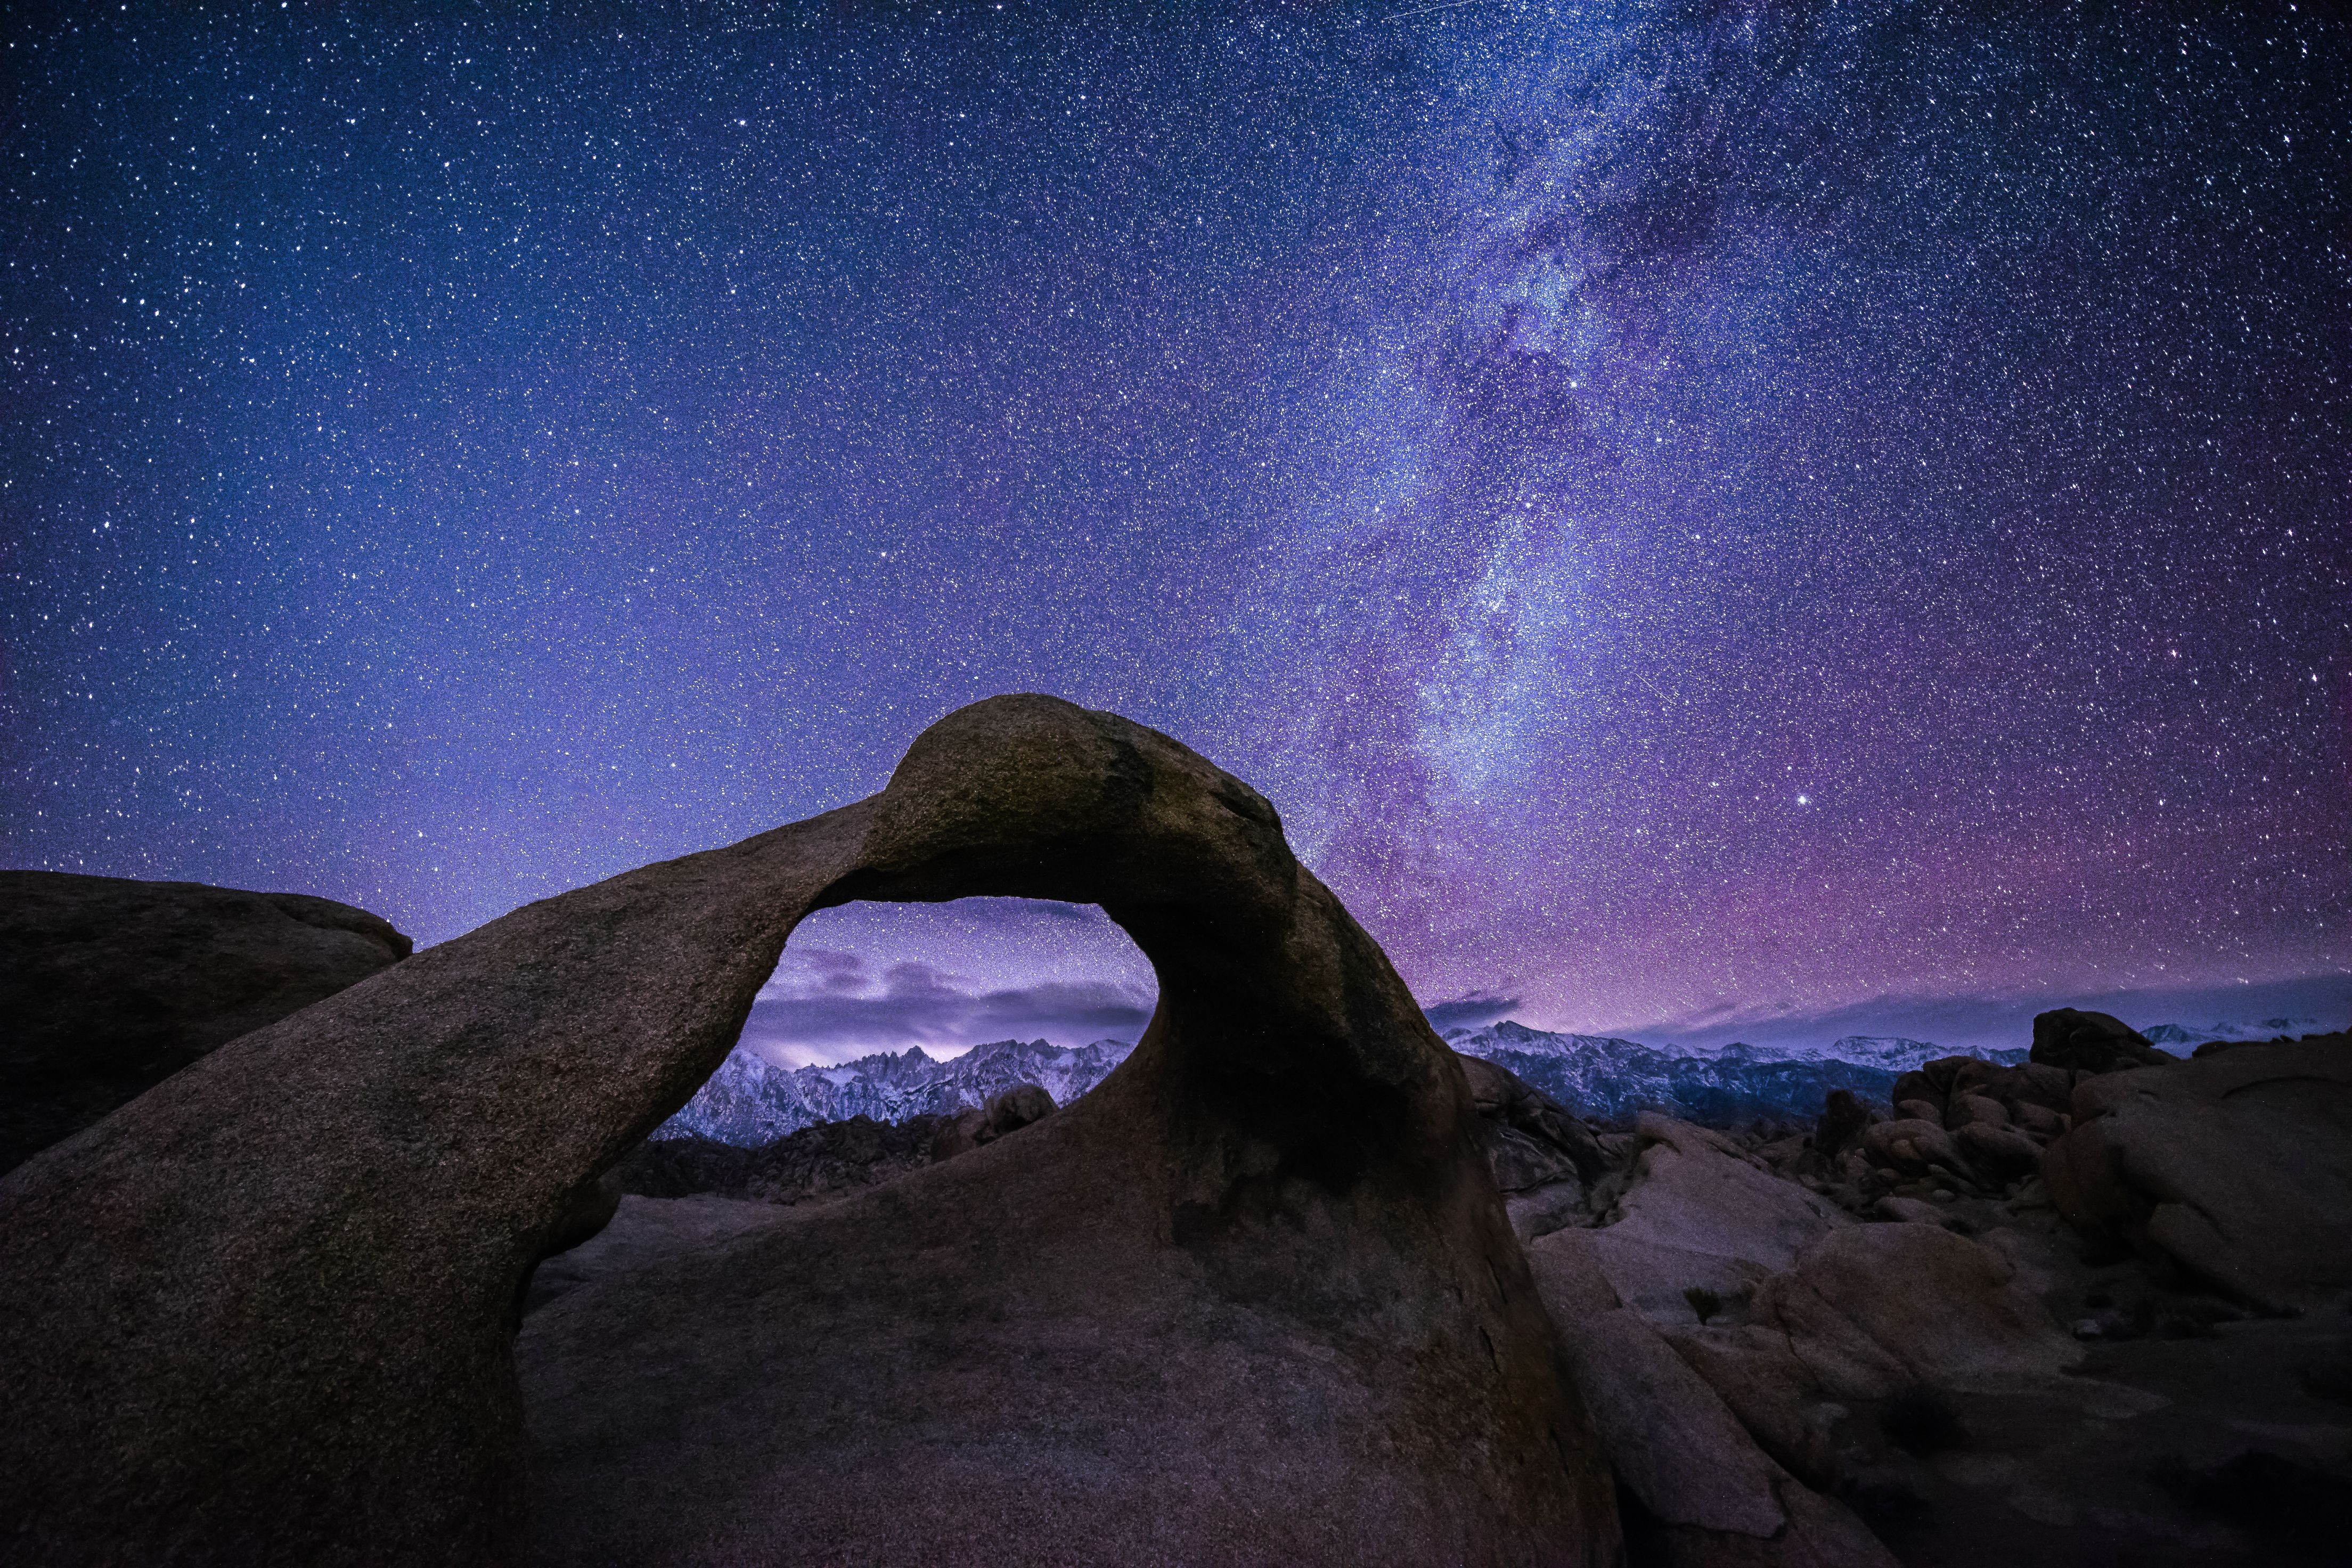 General 4416x2944 Milky Way stars nature rock formation starred sky night stone arch sky long exposure